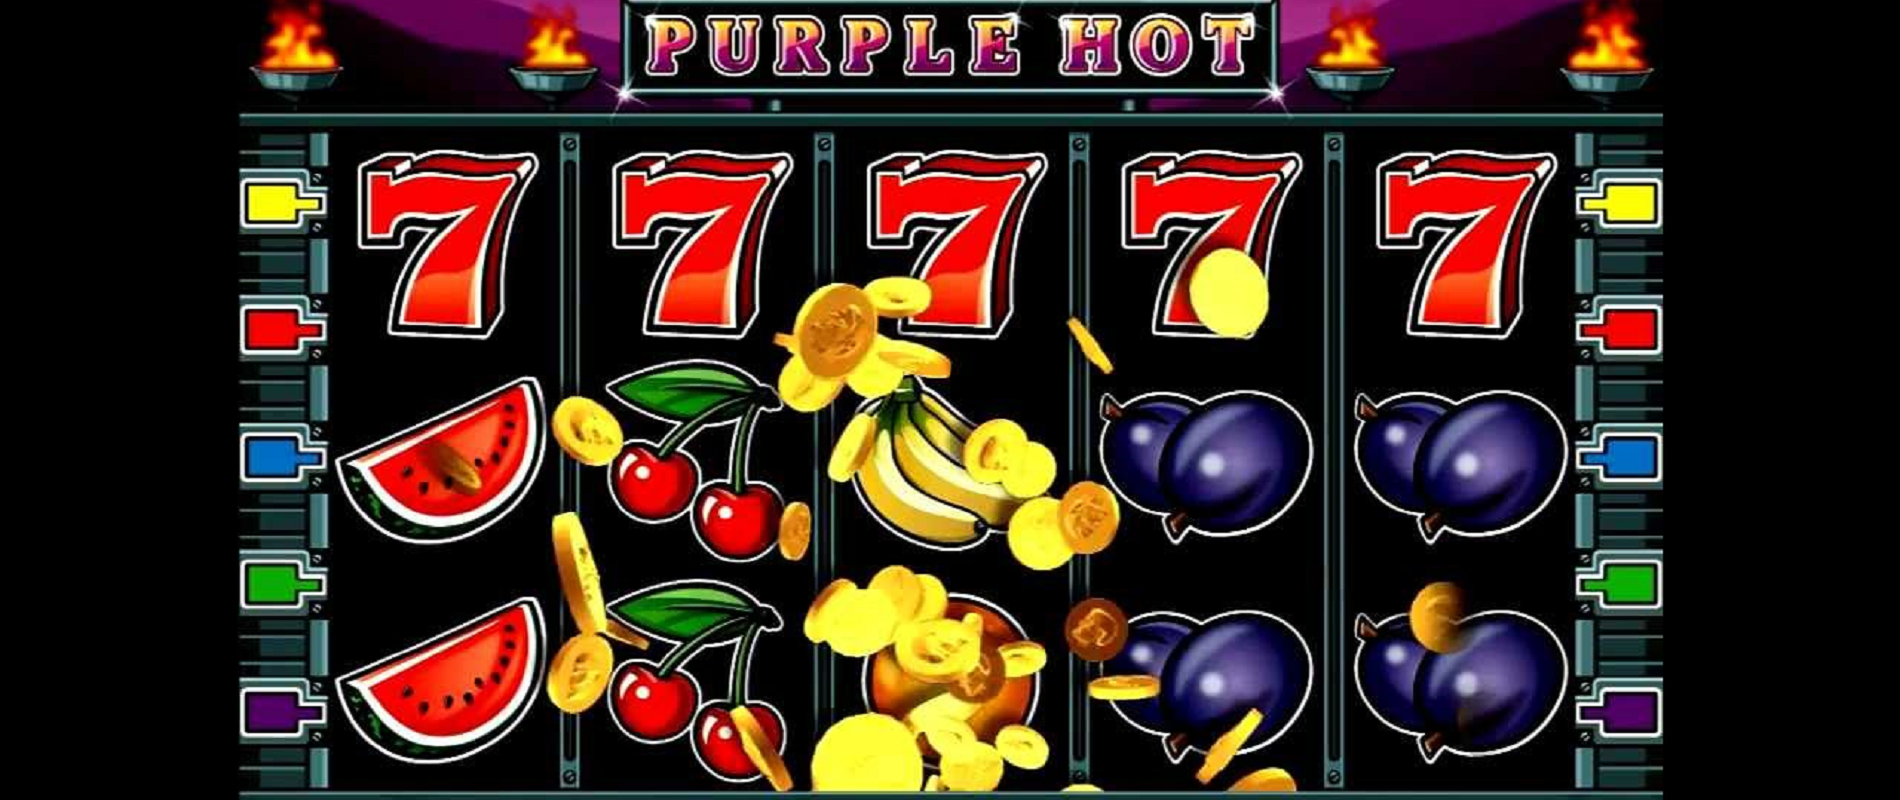 Purple Hot - opis gry | Total Casino